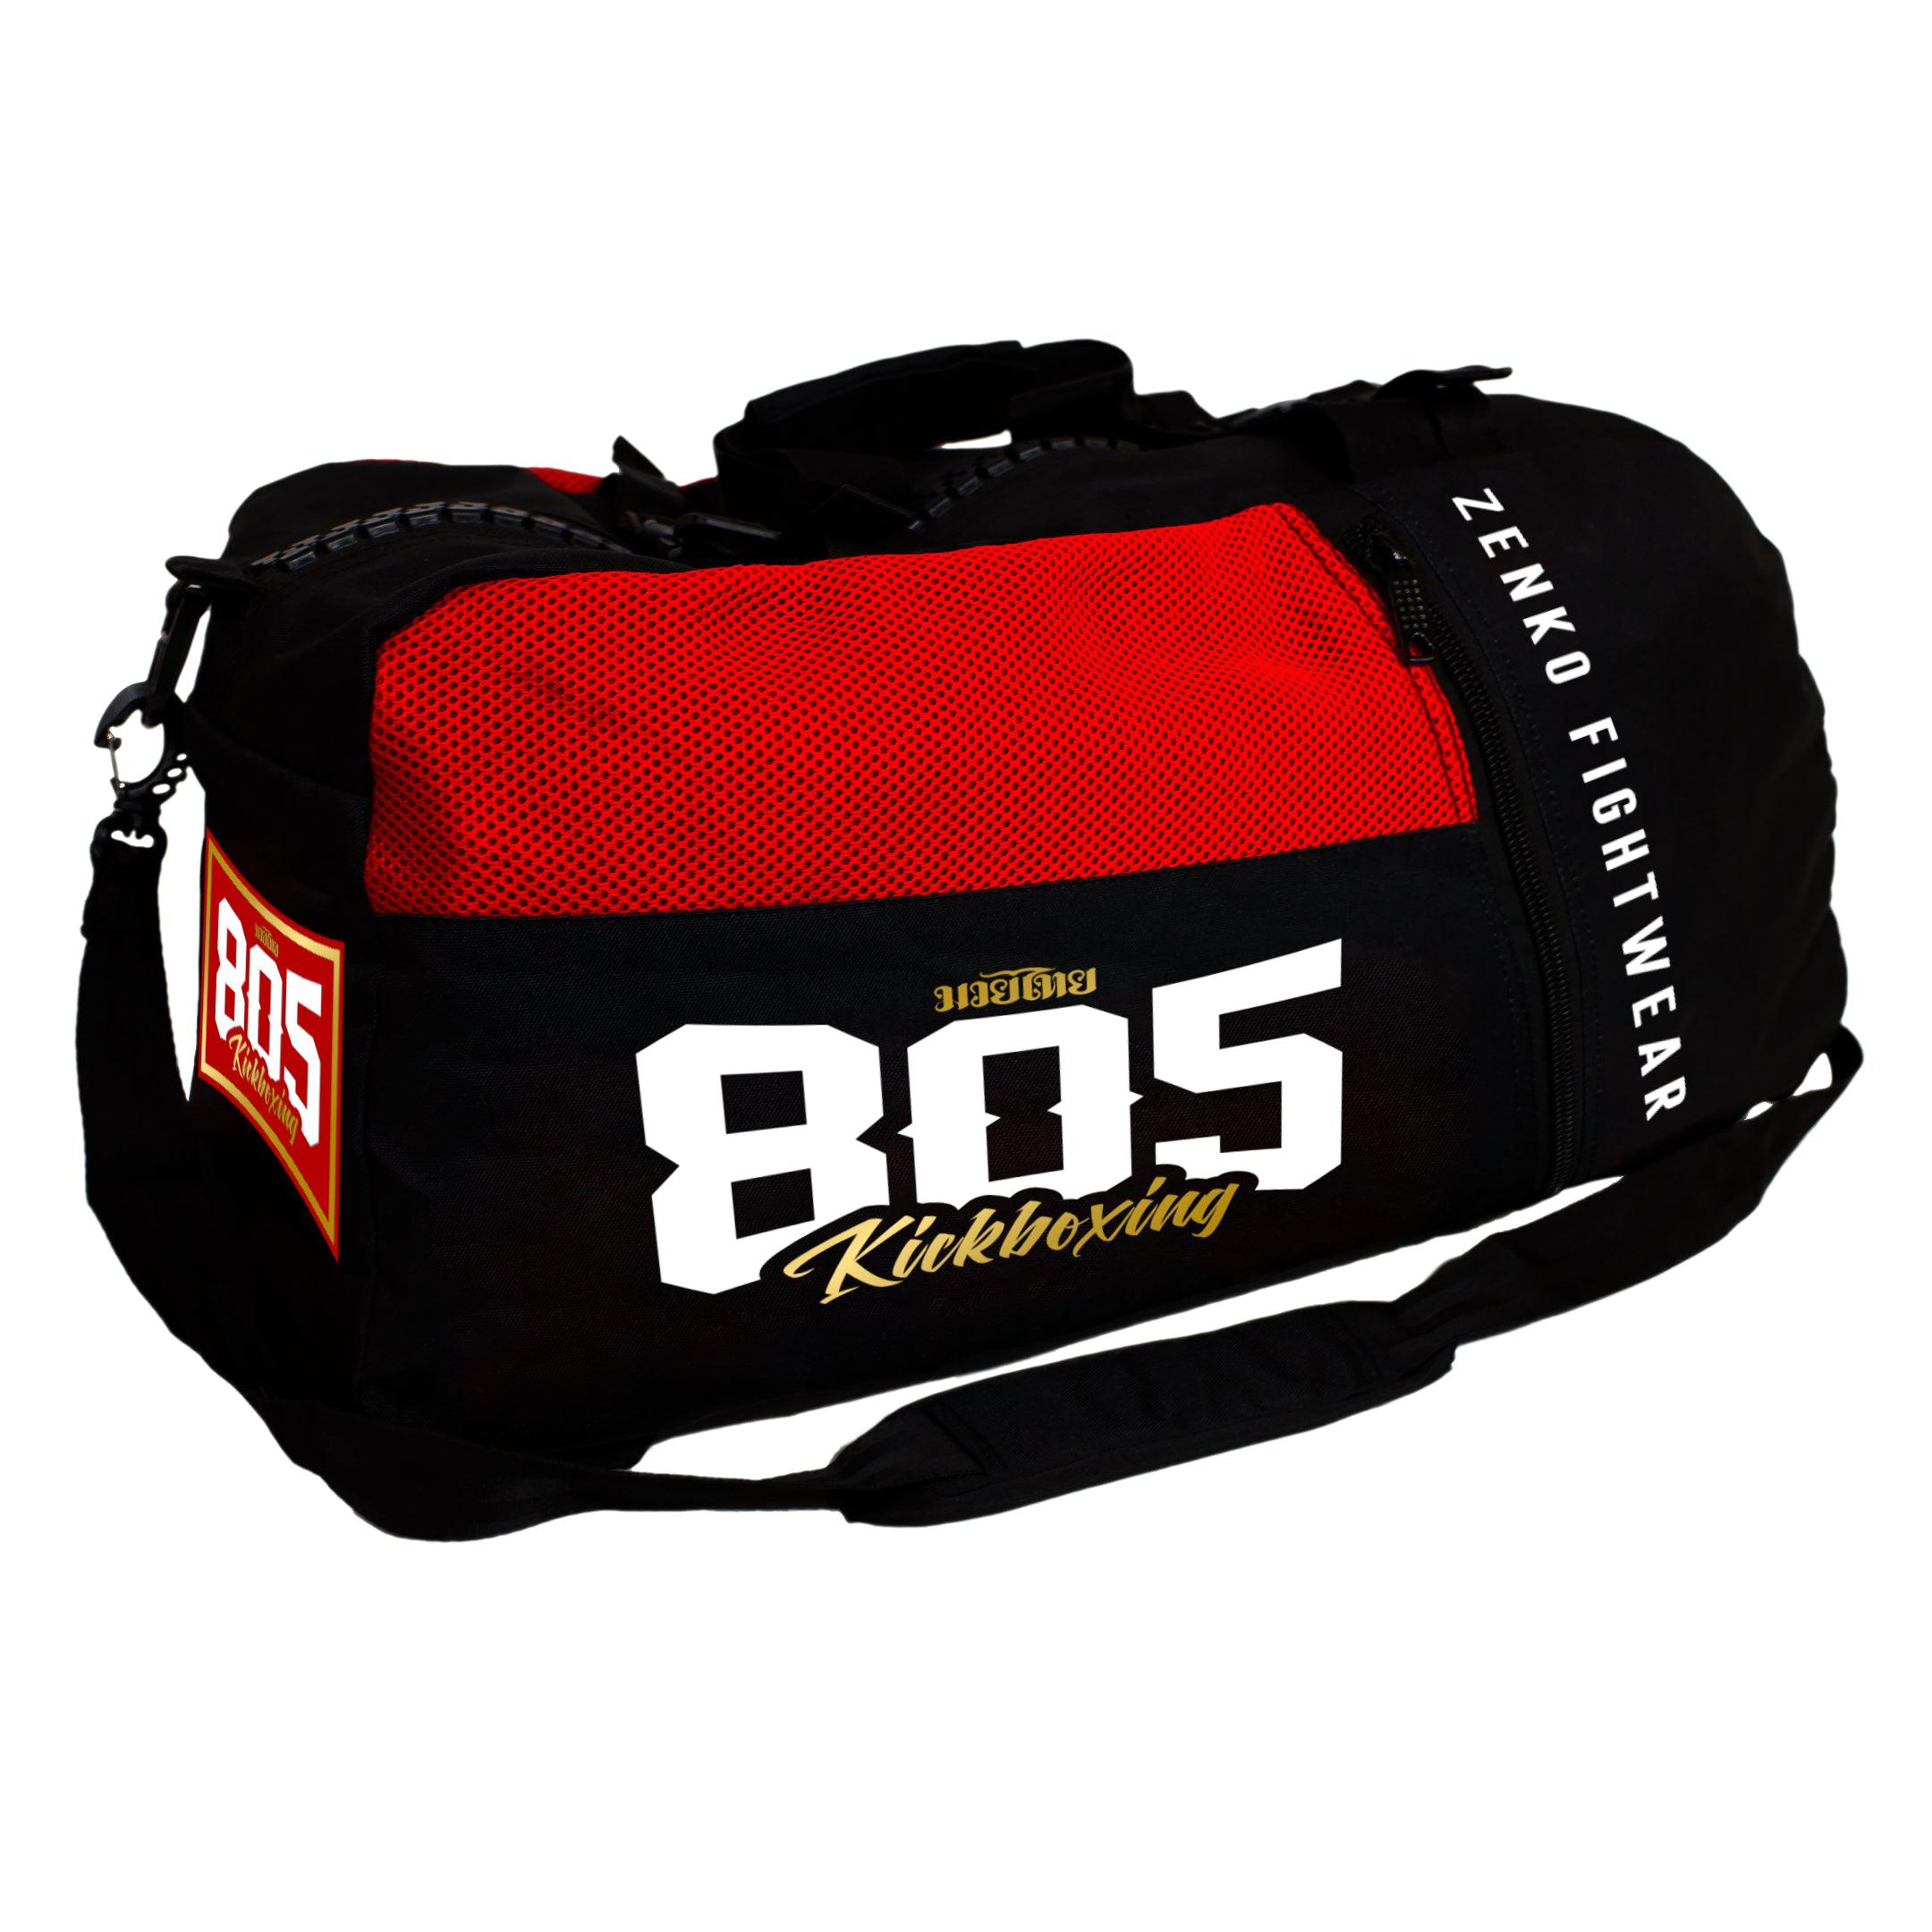 805 Kickboxing Gear Bag (Red & Gold)